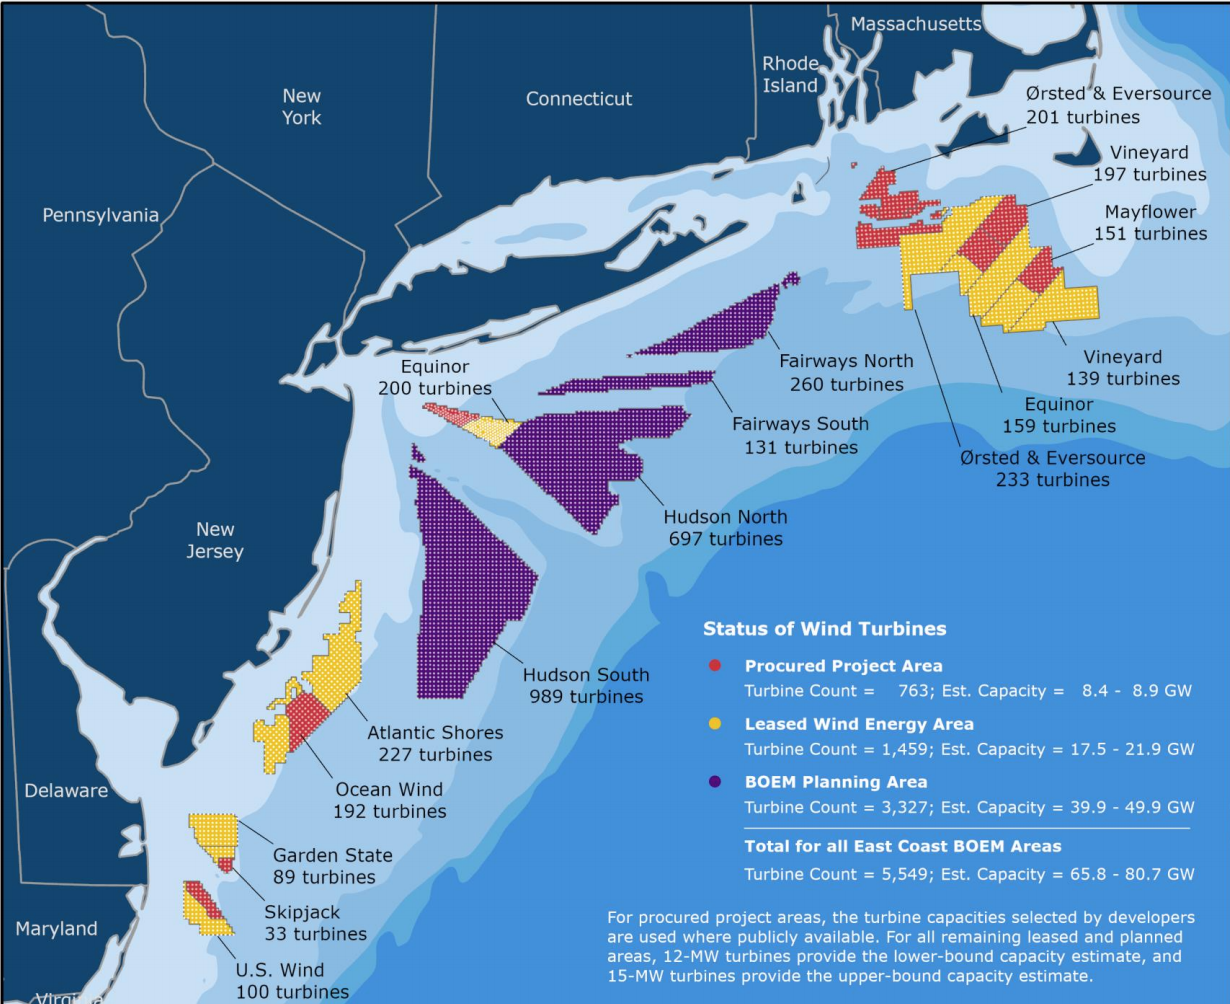 Report says 2021 brought $2 billion in new U.S. offshore wind investment |  WorkBoat